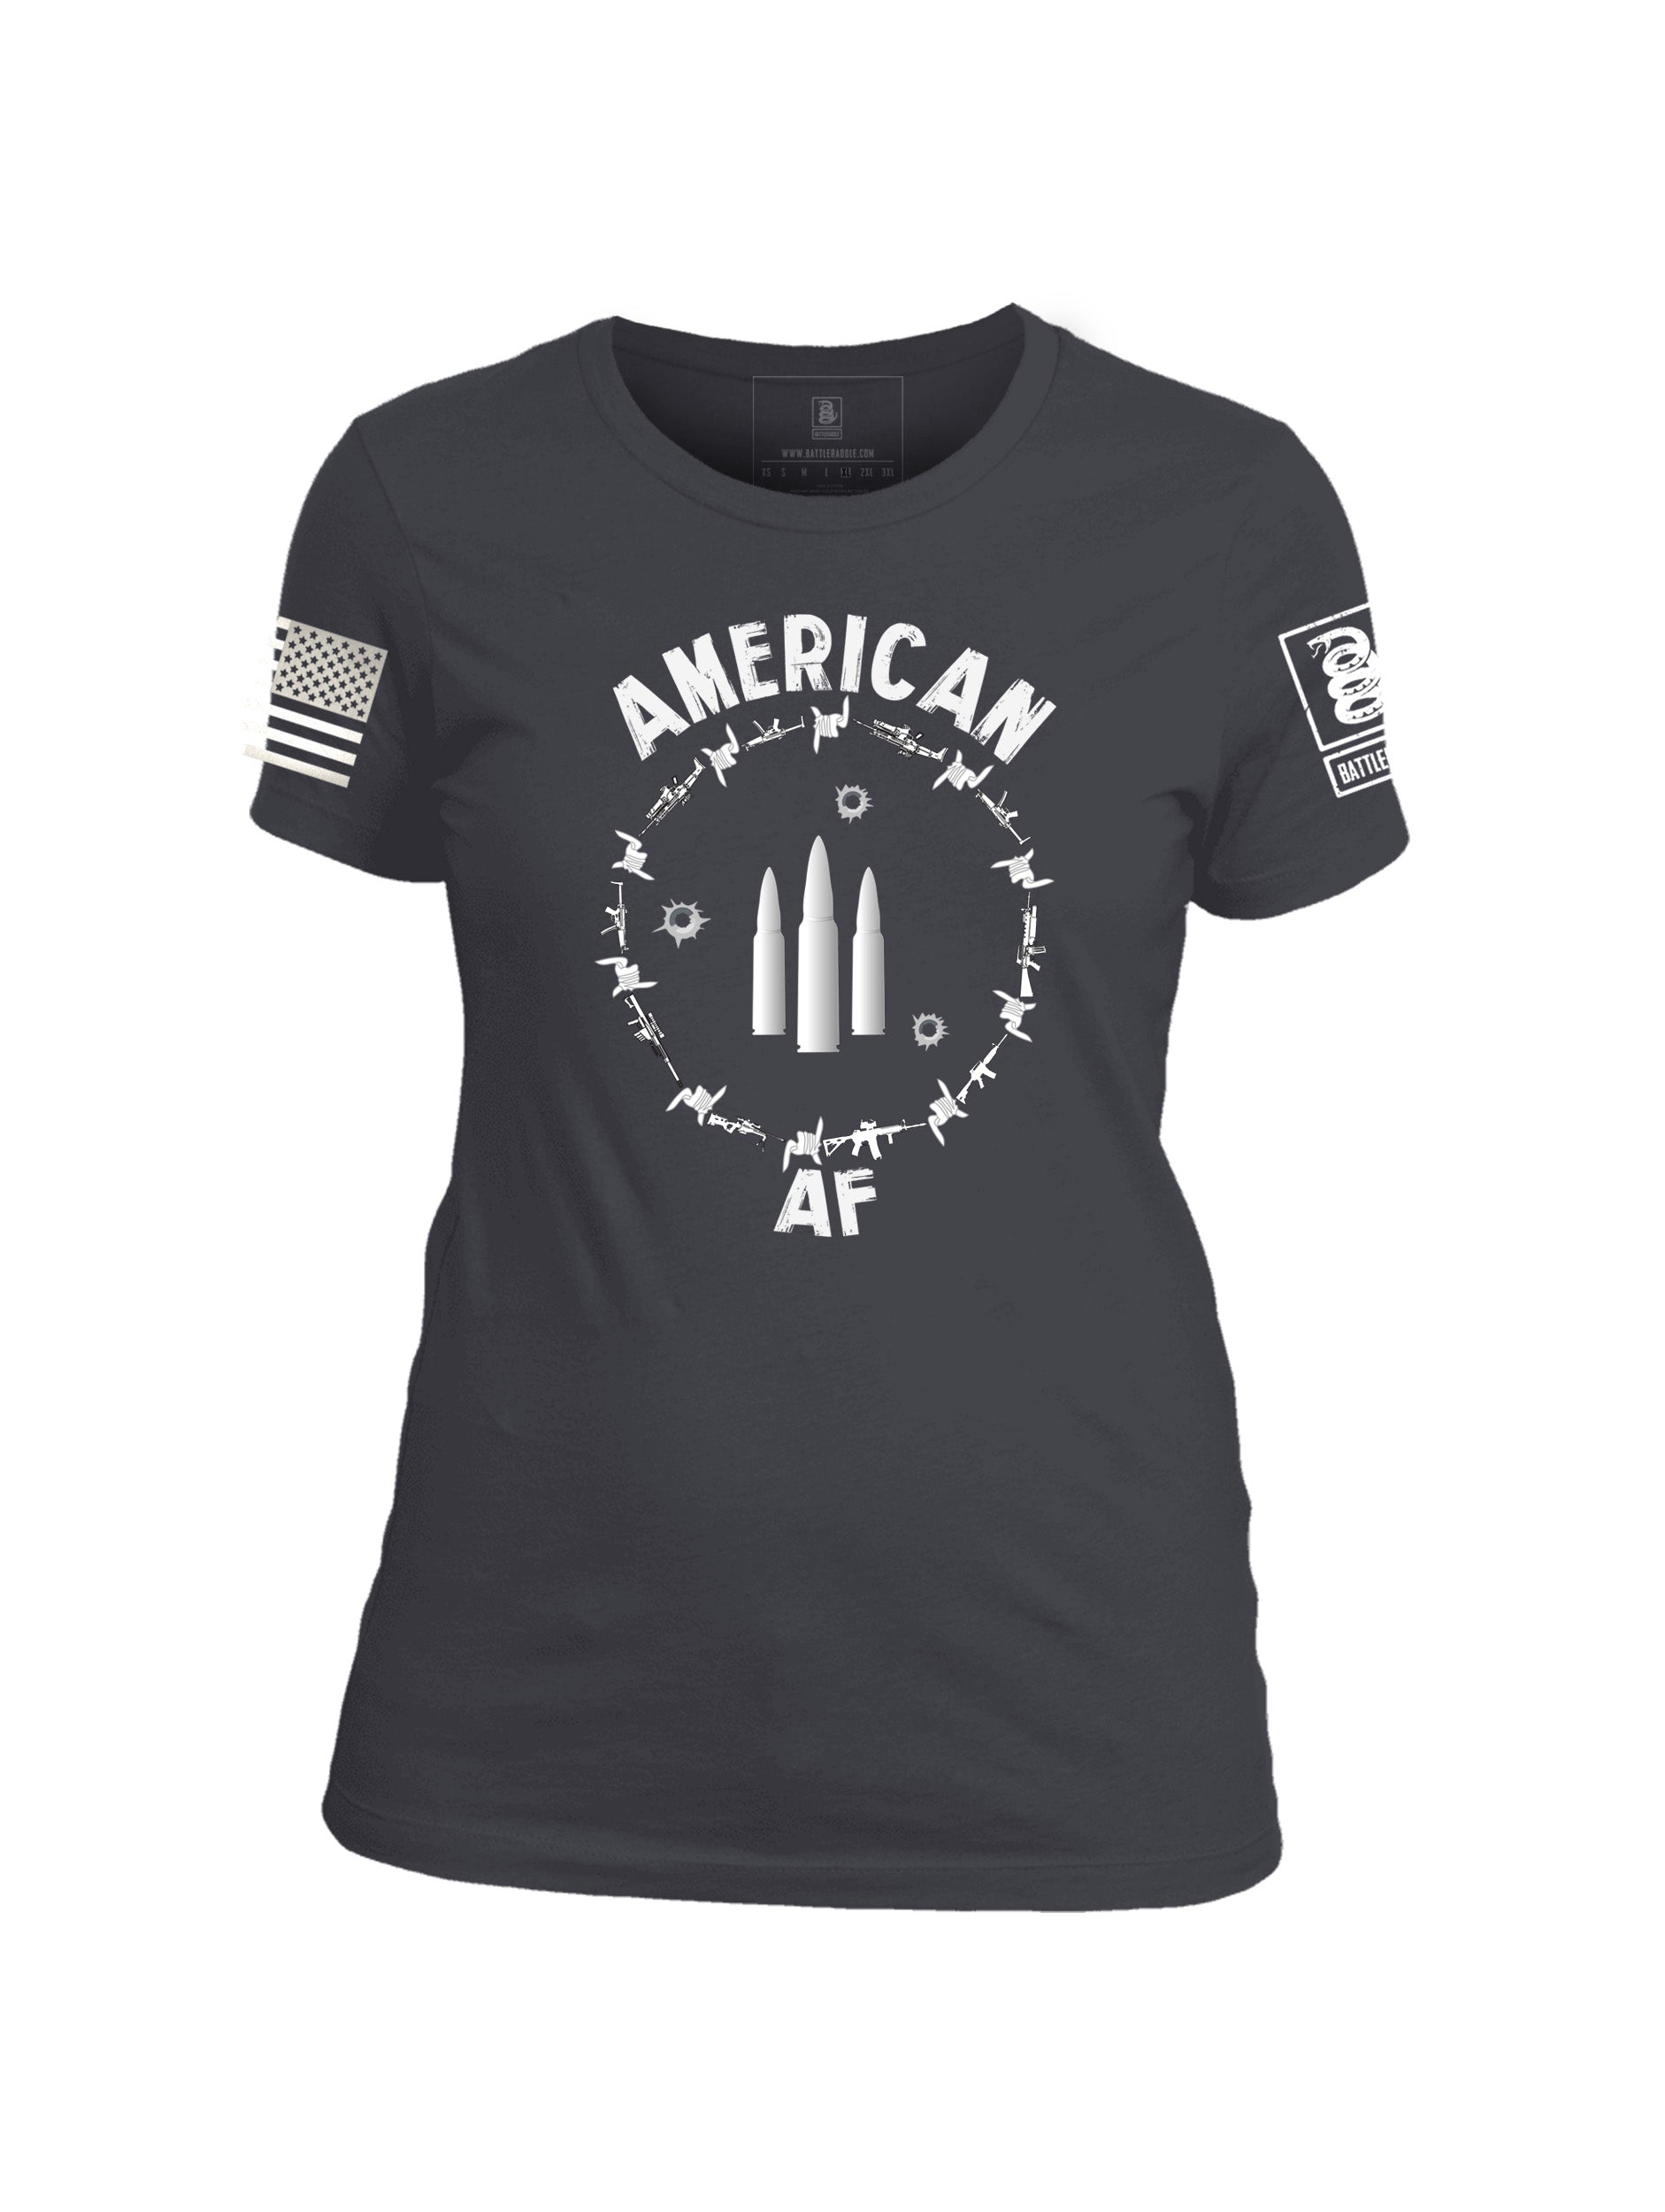 Battleraddle American AF Womens Patriotic Cool Funny Cotton Crew Neck T Shirt